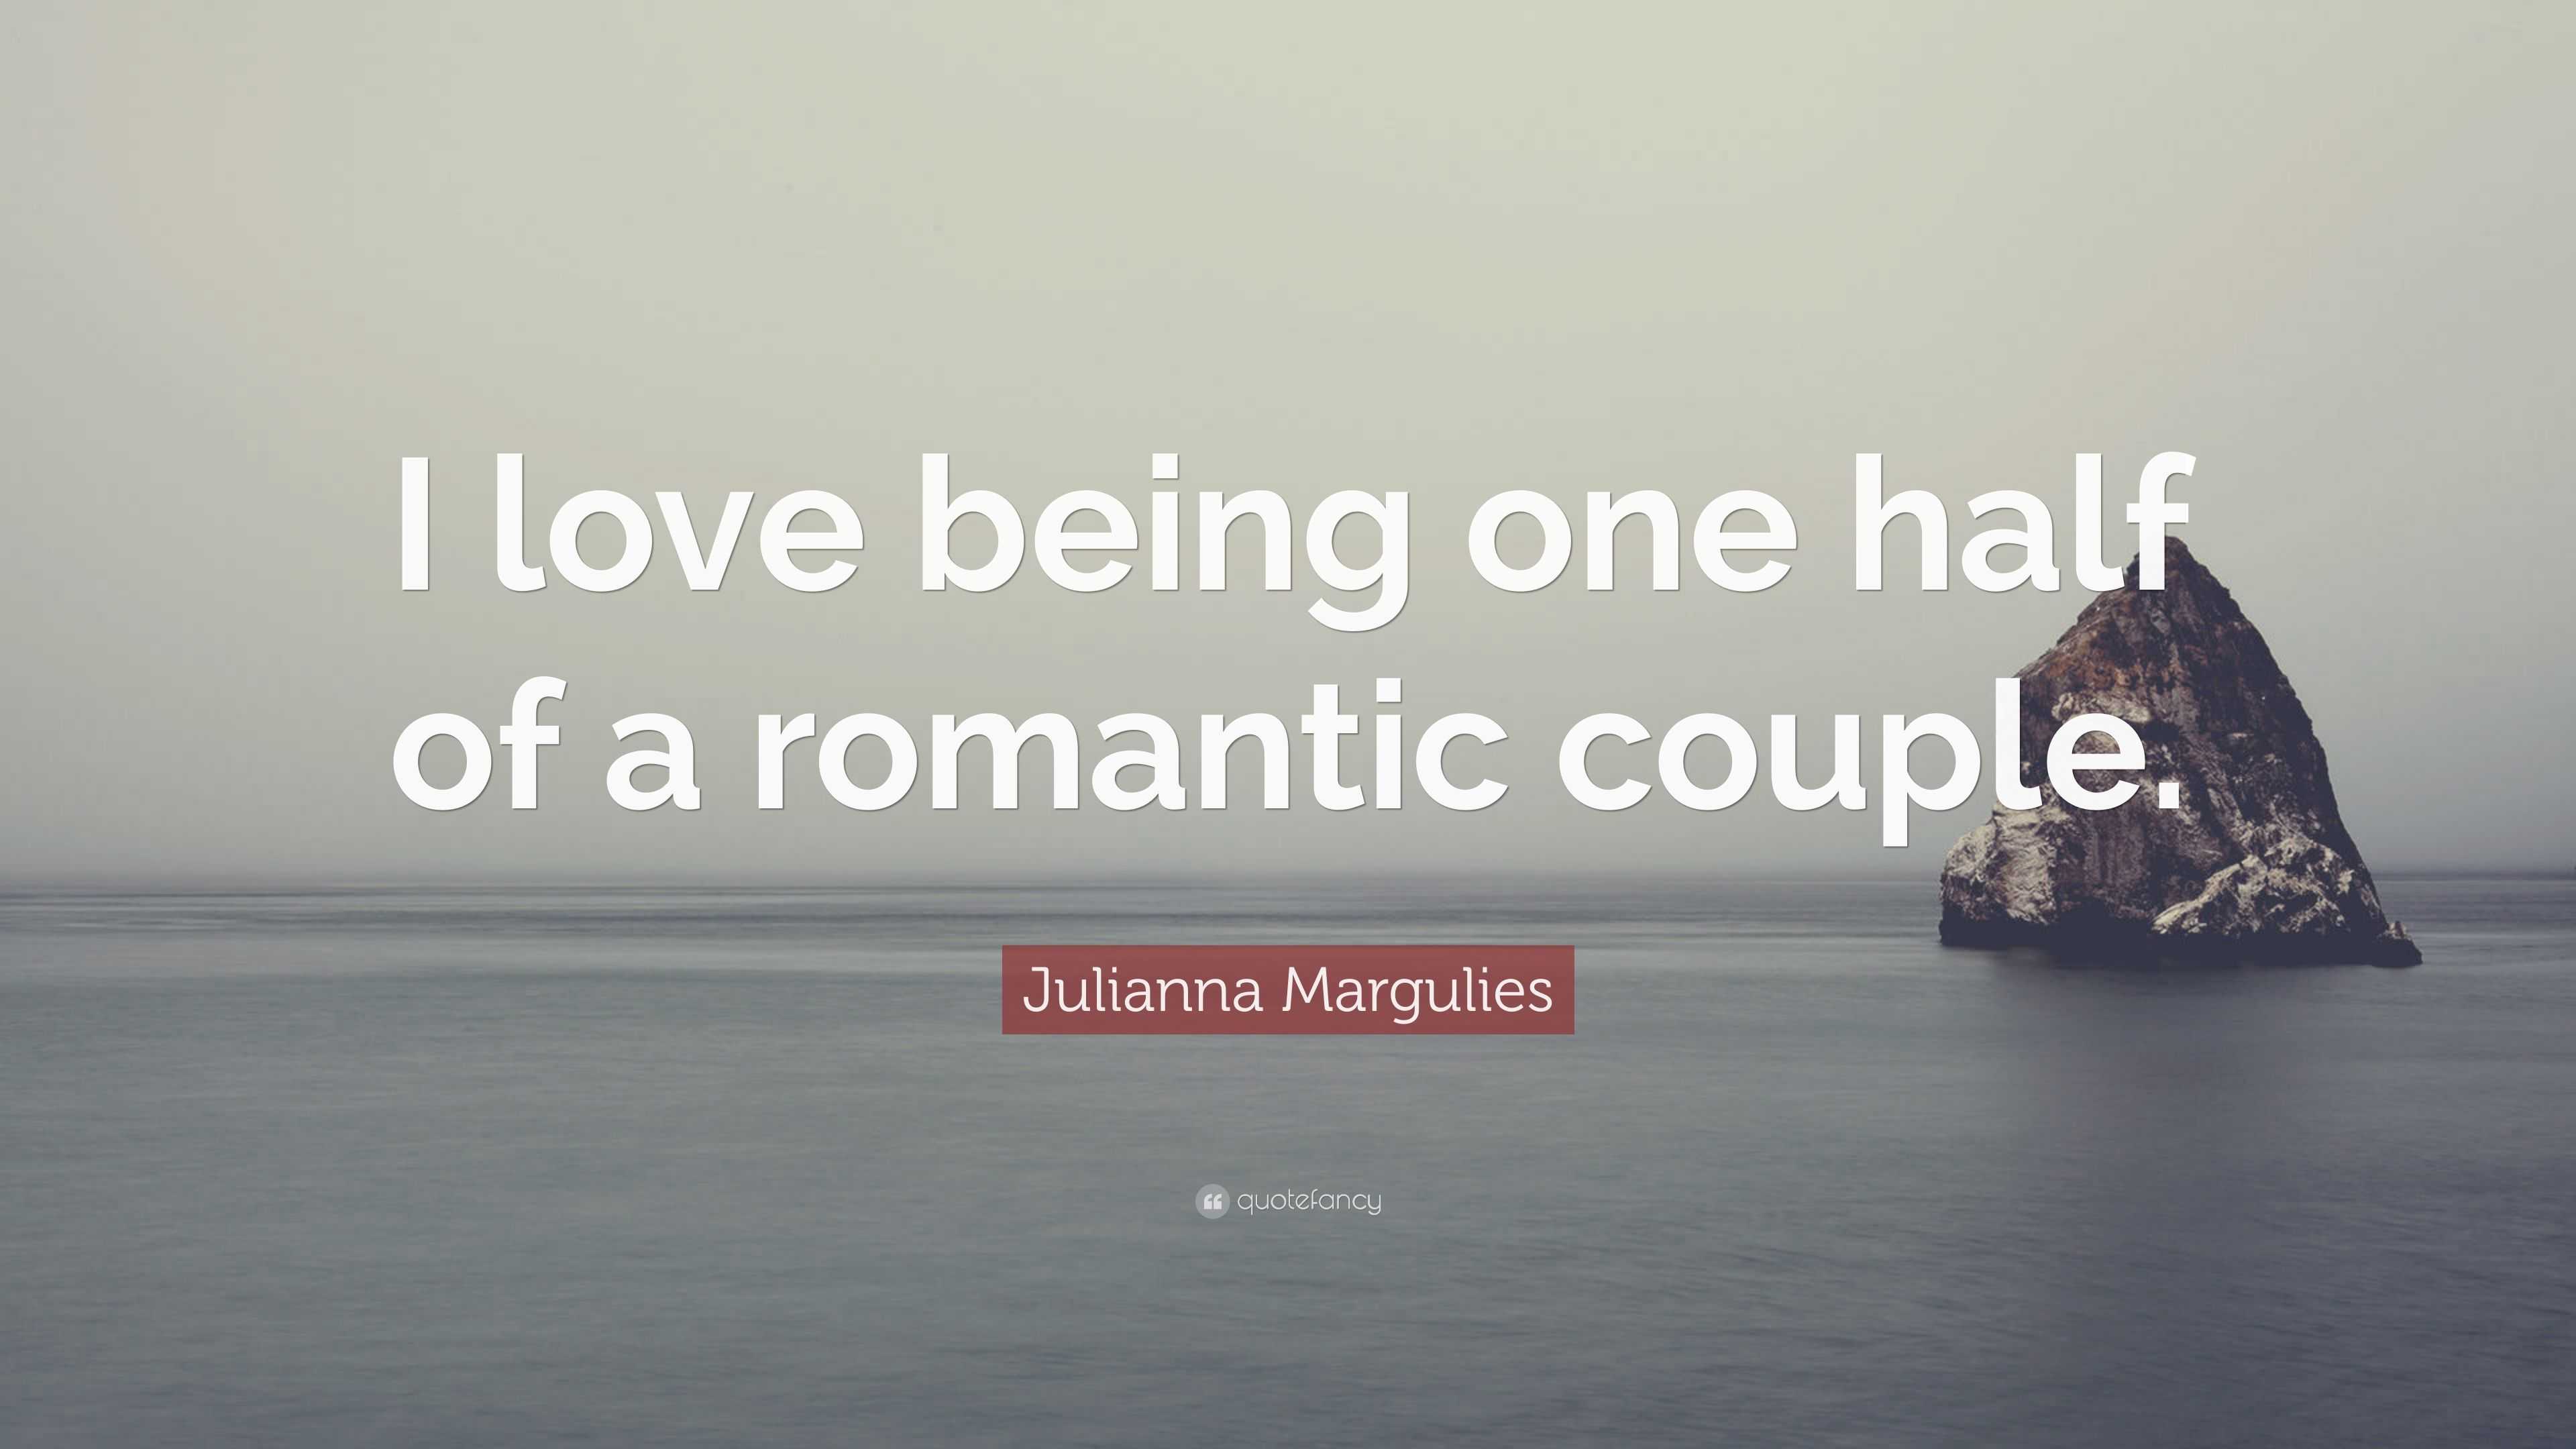 Julianna Margulies Quote: “I love being one half of a romantic couple.”